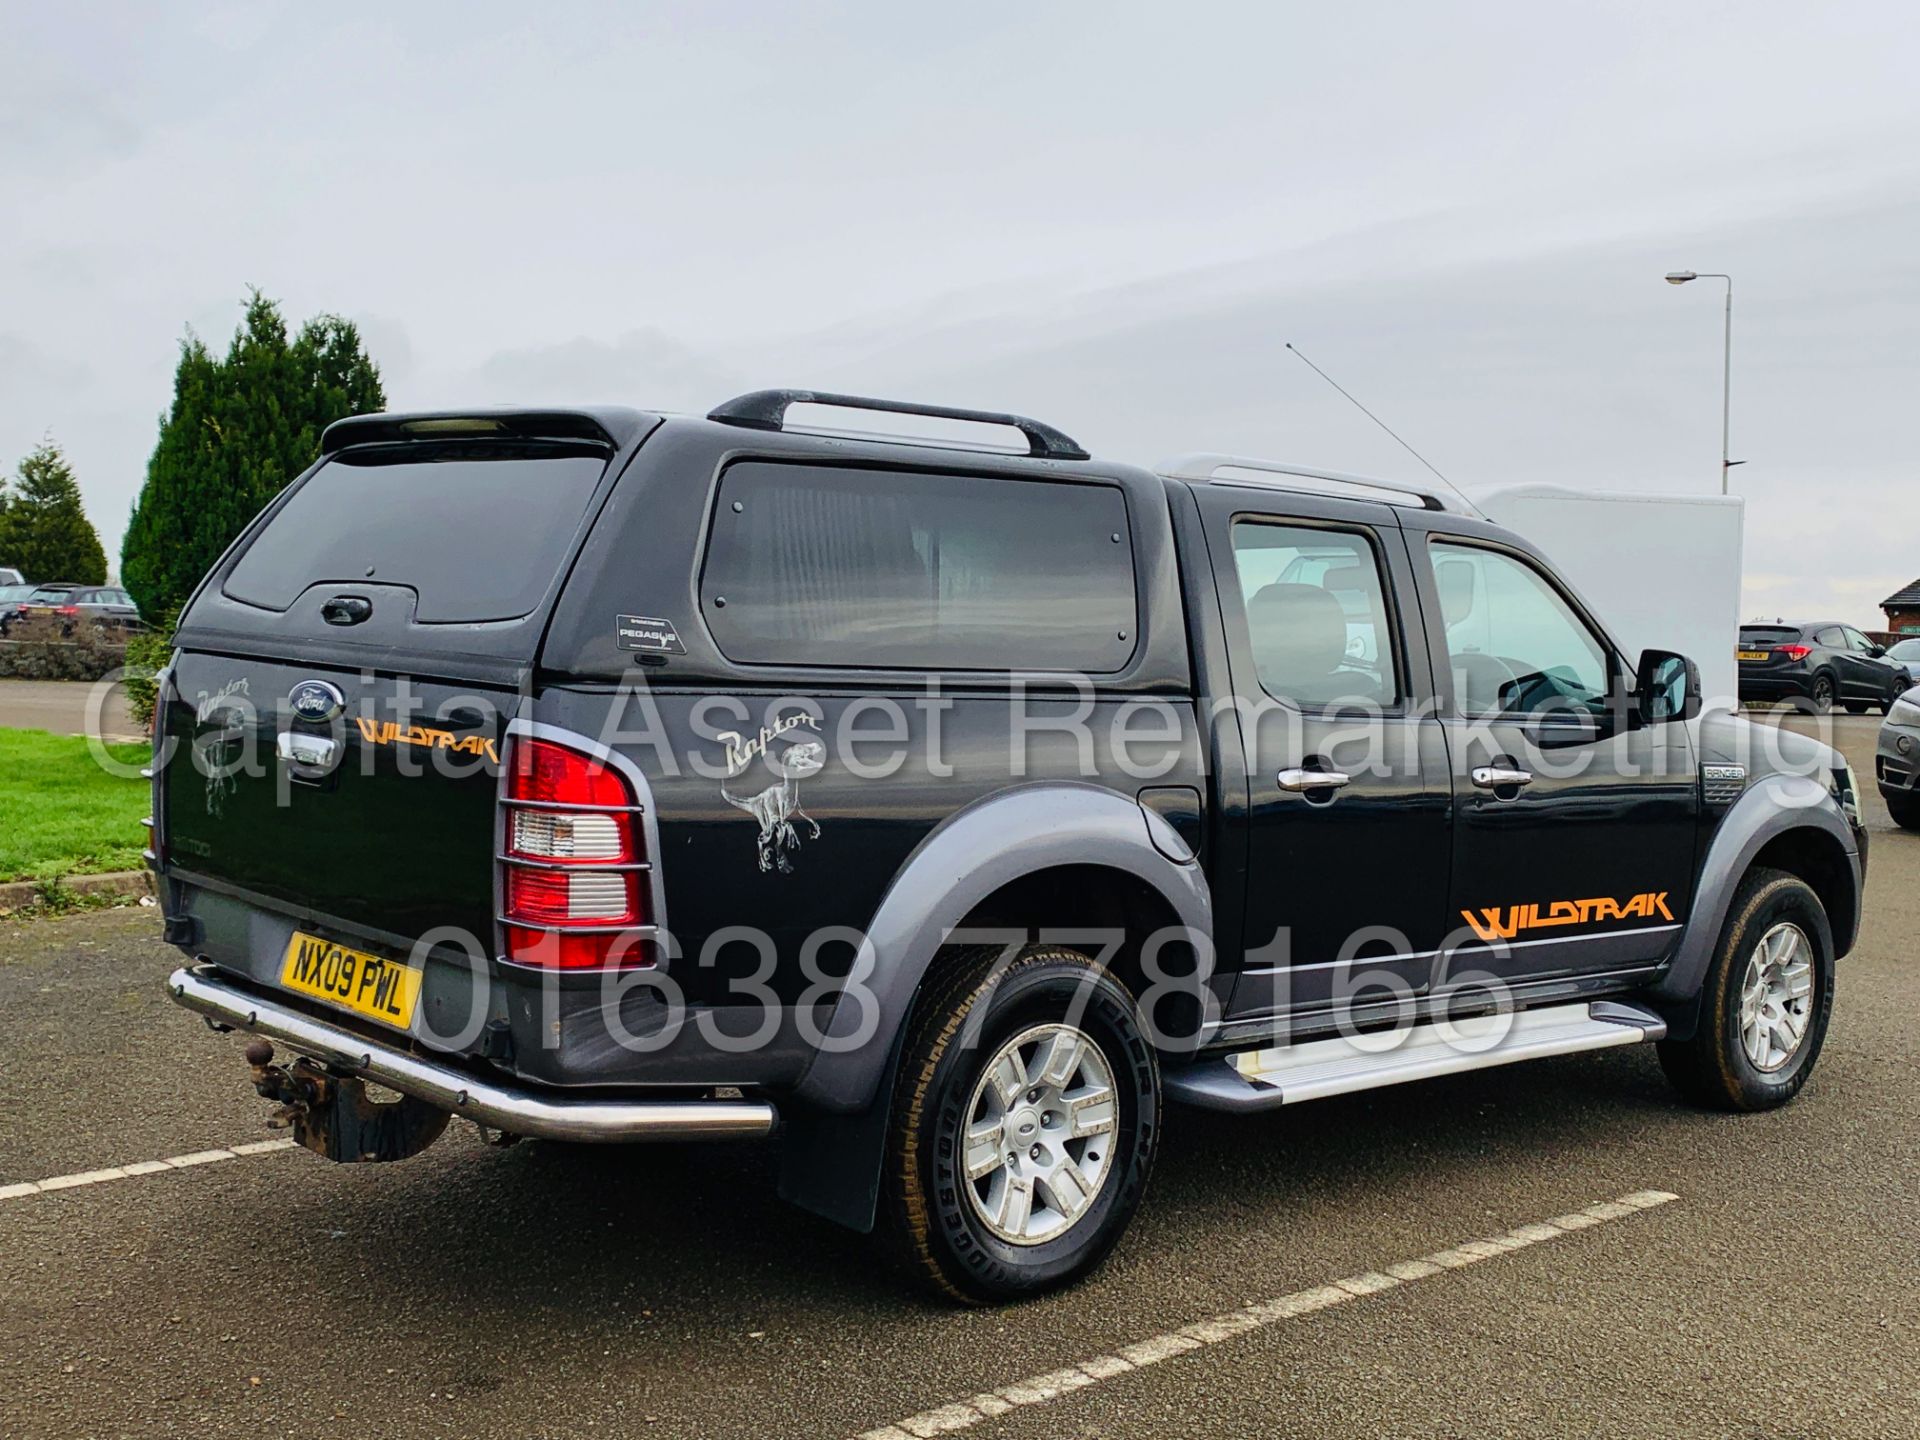 FORD RANGER *WILDTRAK* DOUBLE CAB PICK-UP *4X4* (2009) '3.0 TDCI - 156 BHP* (FULLY LOADED) - Image 12 of 37